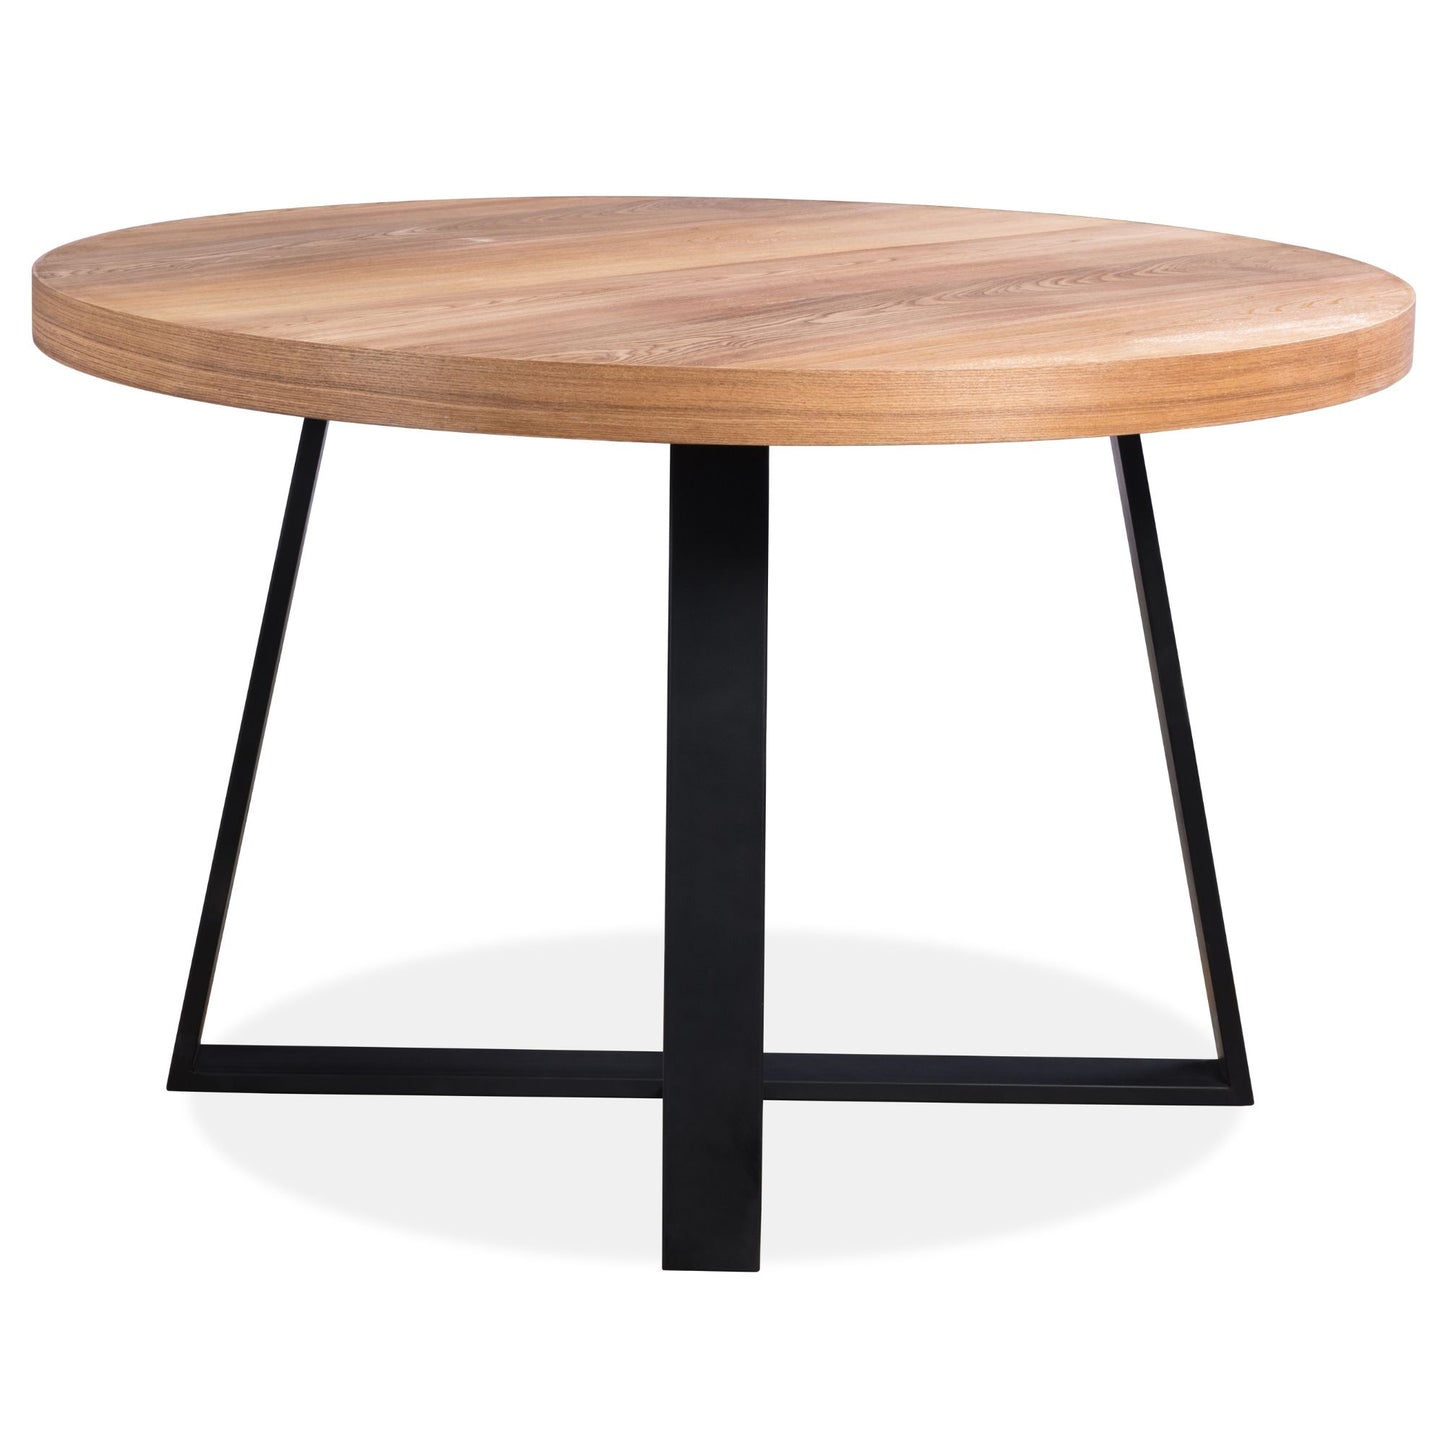 Elm Timber Wood Round Dining Table with Black Metal Leg 120cm - Natural